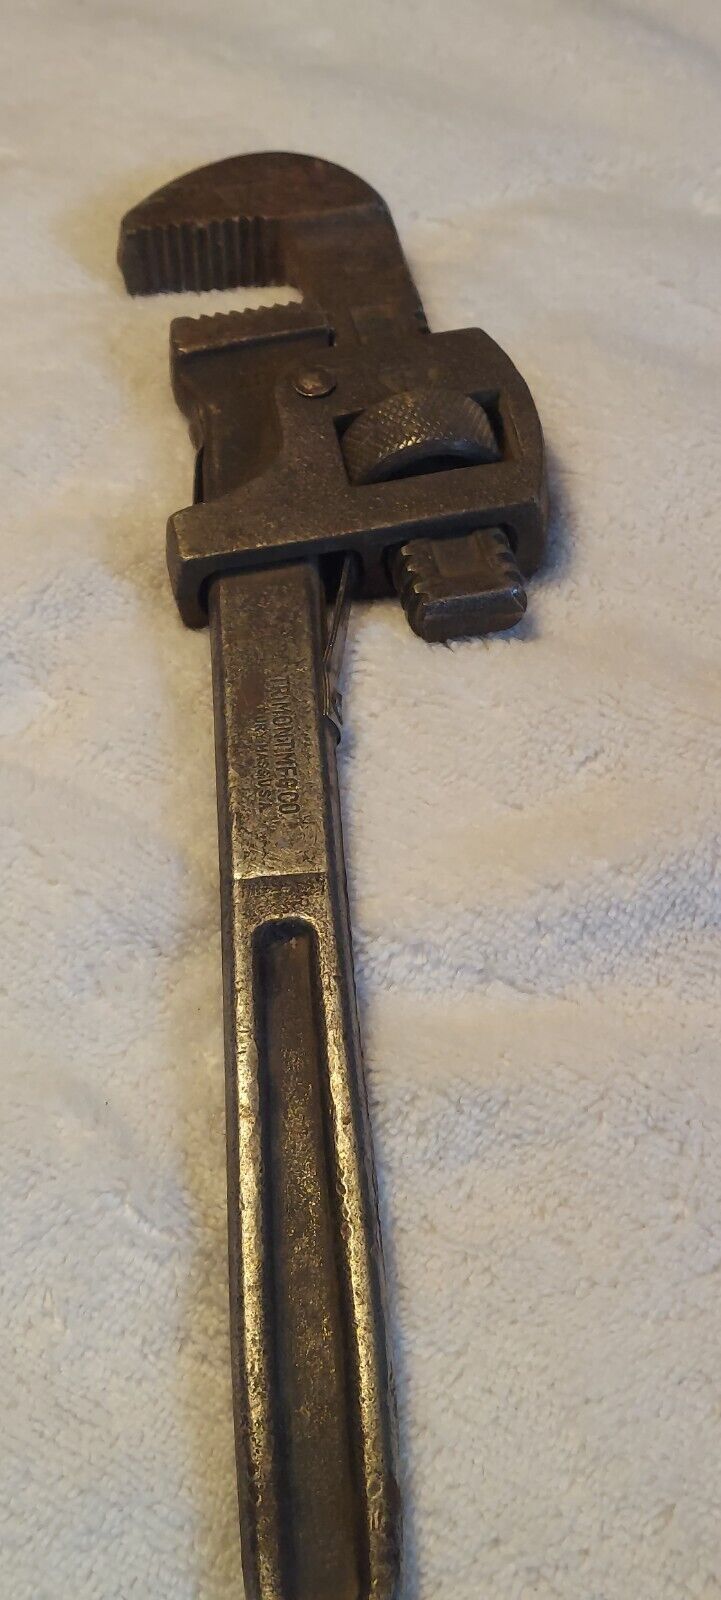 Size fourteen pipe wrench trumont manufacturing company vintage